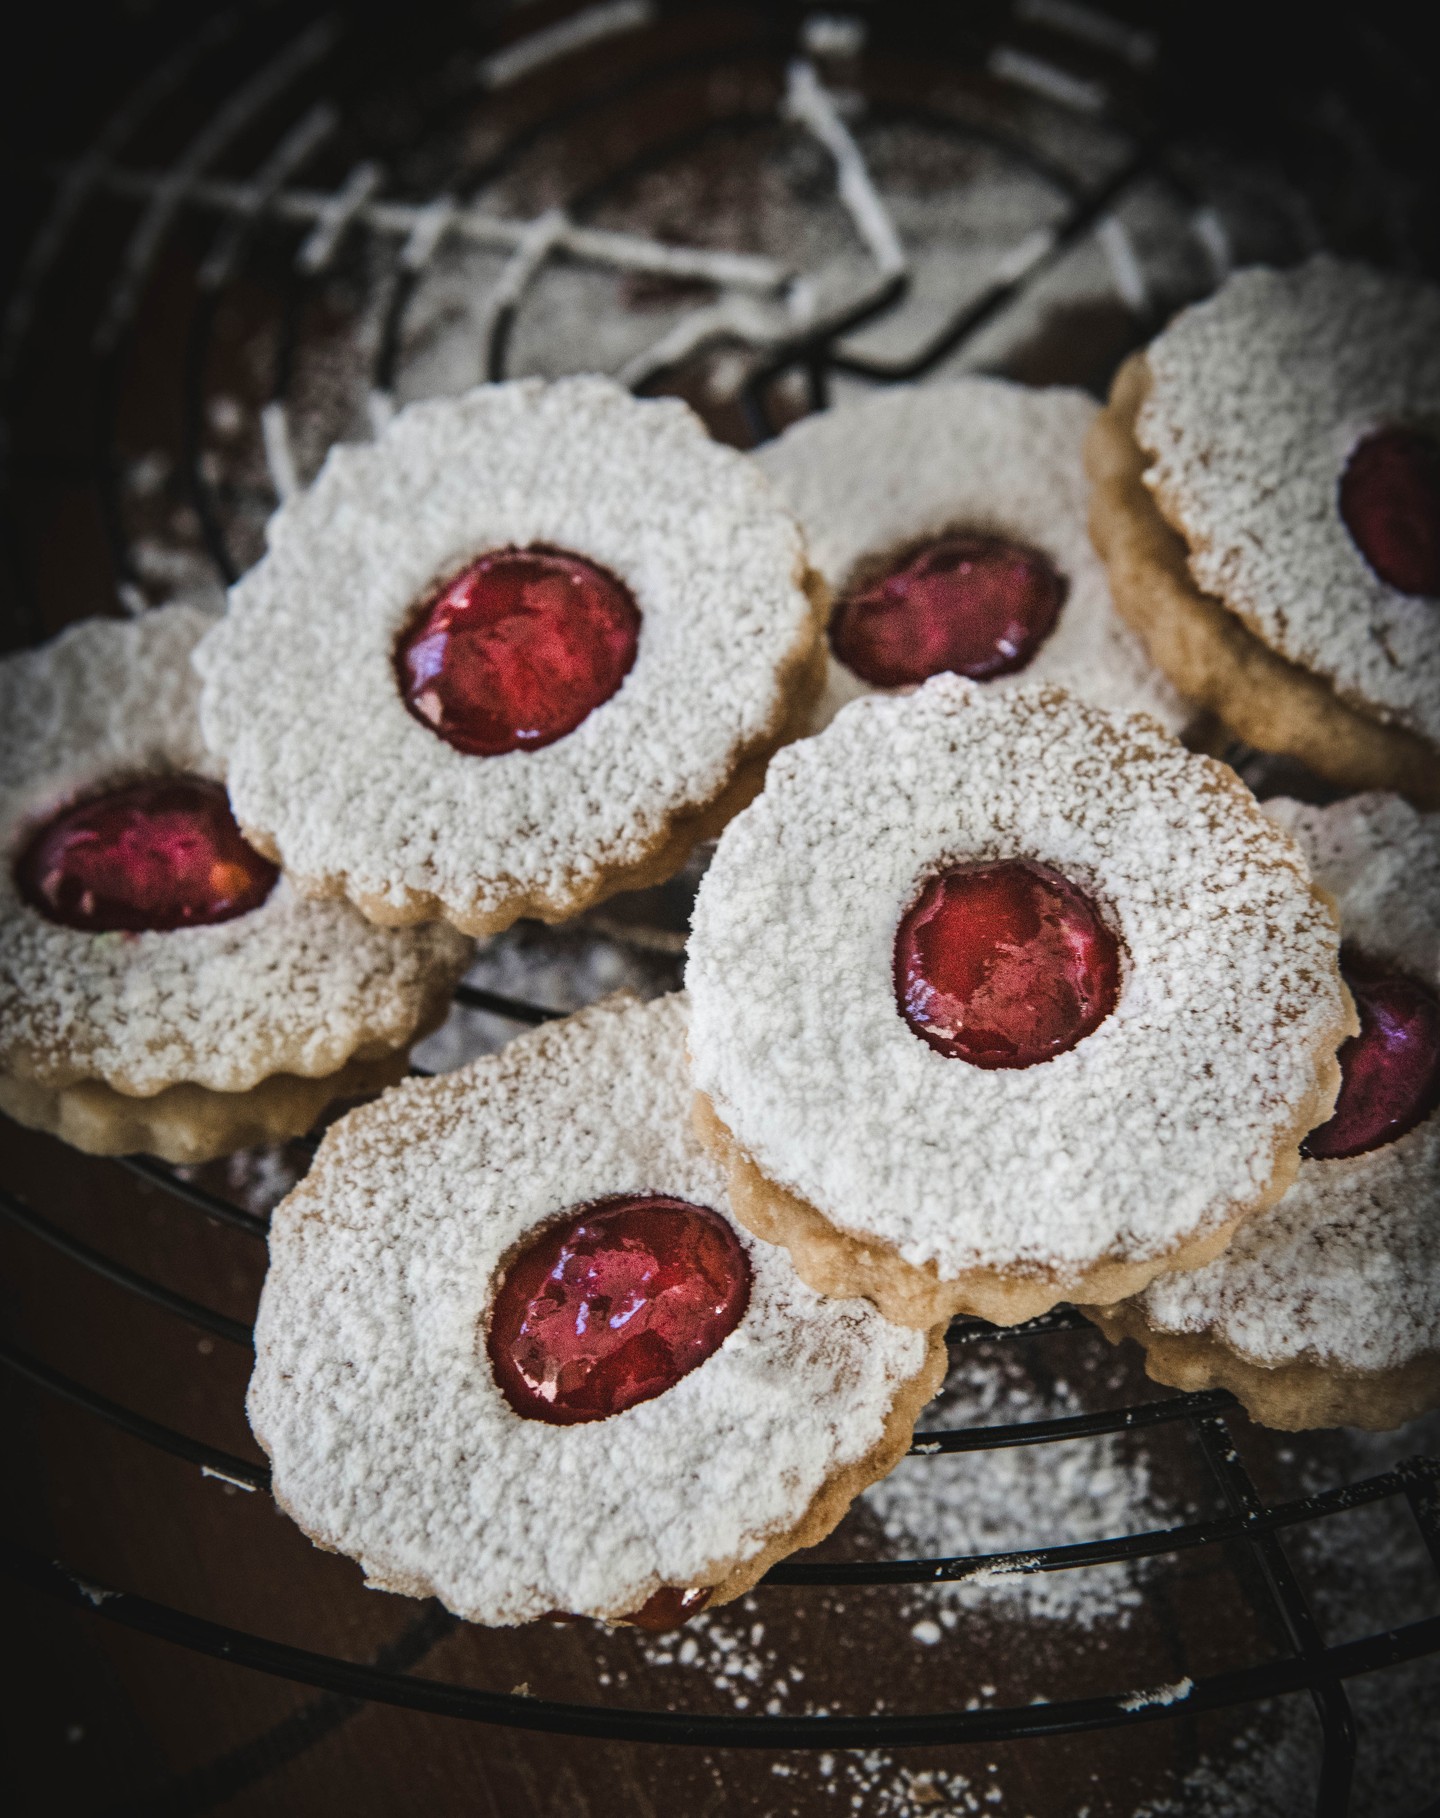 Linzer Cookies are some of my absolute favorites. I am a sucker for a cookie with jam. This easy recipe is gluten free (and egg free) and still so delicious. You can find the recipe in my bio or in my stories, or, you can DM me directly for it!
.
.
.
.
.
.
.
.
.
.
.
#siftrva #cookies #linzercookies #glutenfreebaking #thebiteshot #vafoodie #f52community #storyofmytable #bombesquad #feedfeed #f52grams #thebakefeed #bakefromscratch #makemore #beautifulfood #foodphotography #foodforfoodies #shareyourtable #wherewomencreate #foodphotographyandstyling #theartofslowliving #eatrealfood #heresmyfood #imsomartha #pursueyourpassion #mywilliamssonoma #wsbakeclub #foodtographyschool #glutenfree

@thebakefeed @thefeedfeed.baking @thefeedfeed @foodtographyschool @surlatable